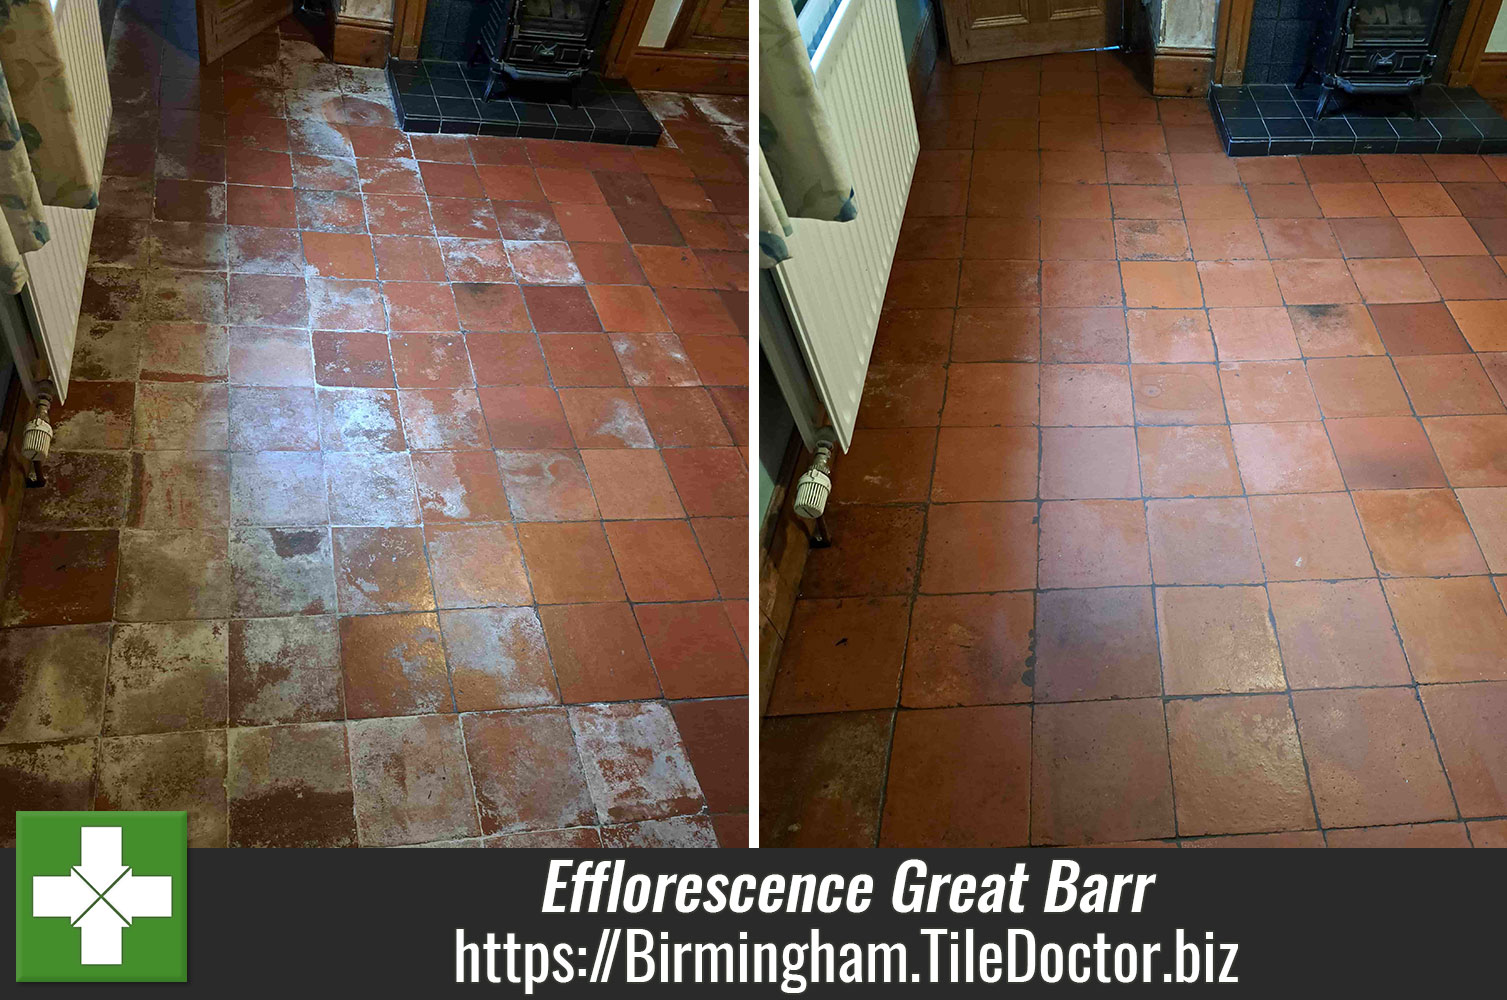 Removing Efflorescence Stains with Grout Clean-up in Great Barr Birmingham